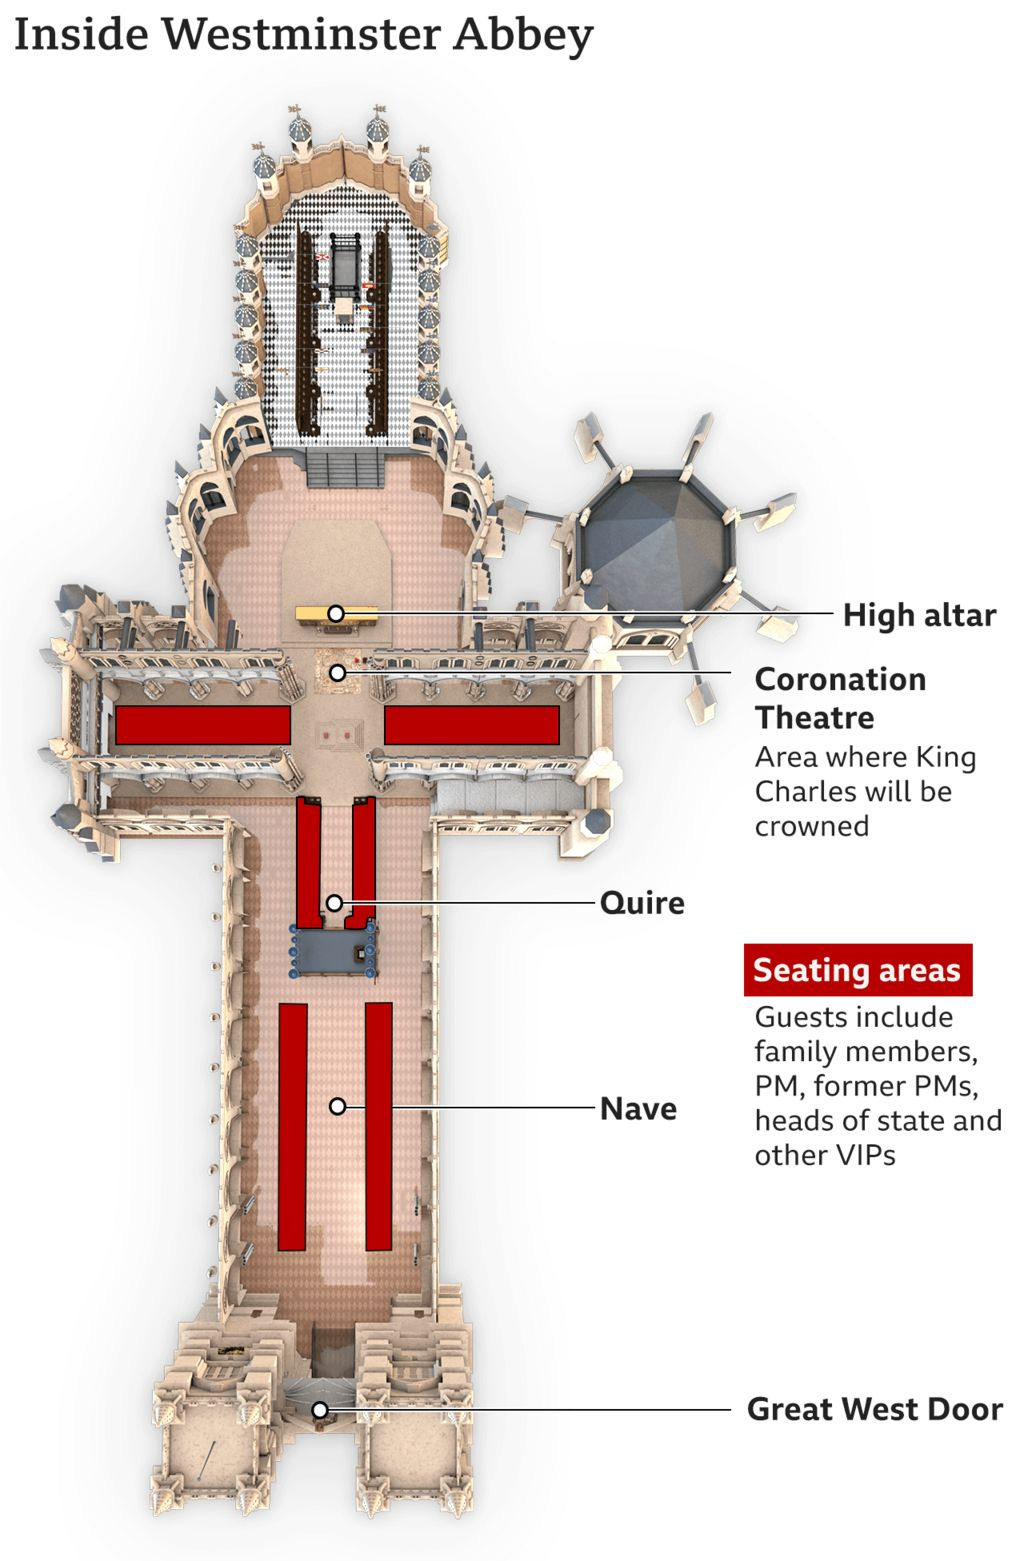 Graphic showing the inside Westminster Abbey and the position of the nave, quire, coronation area and the high altar